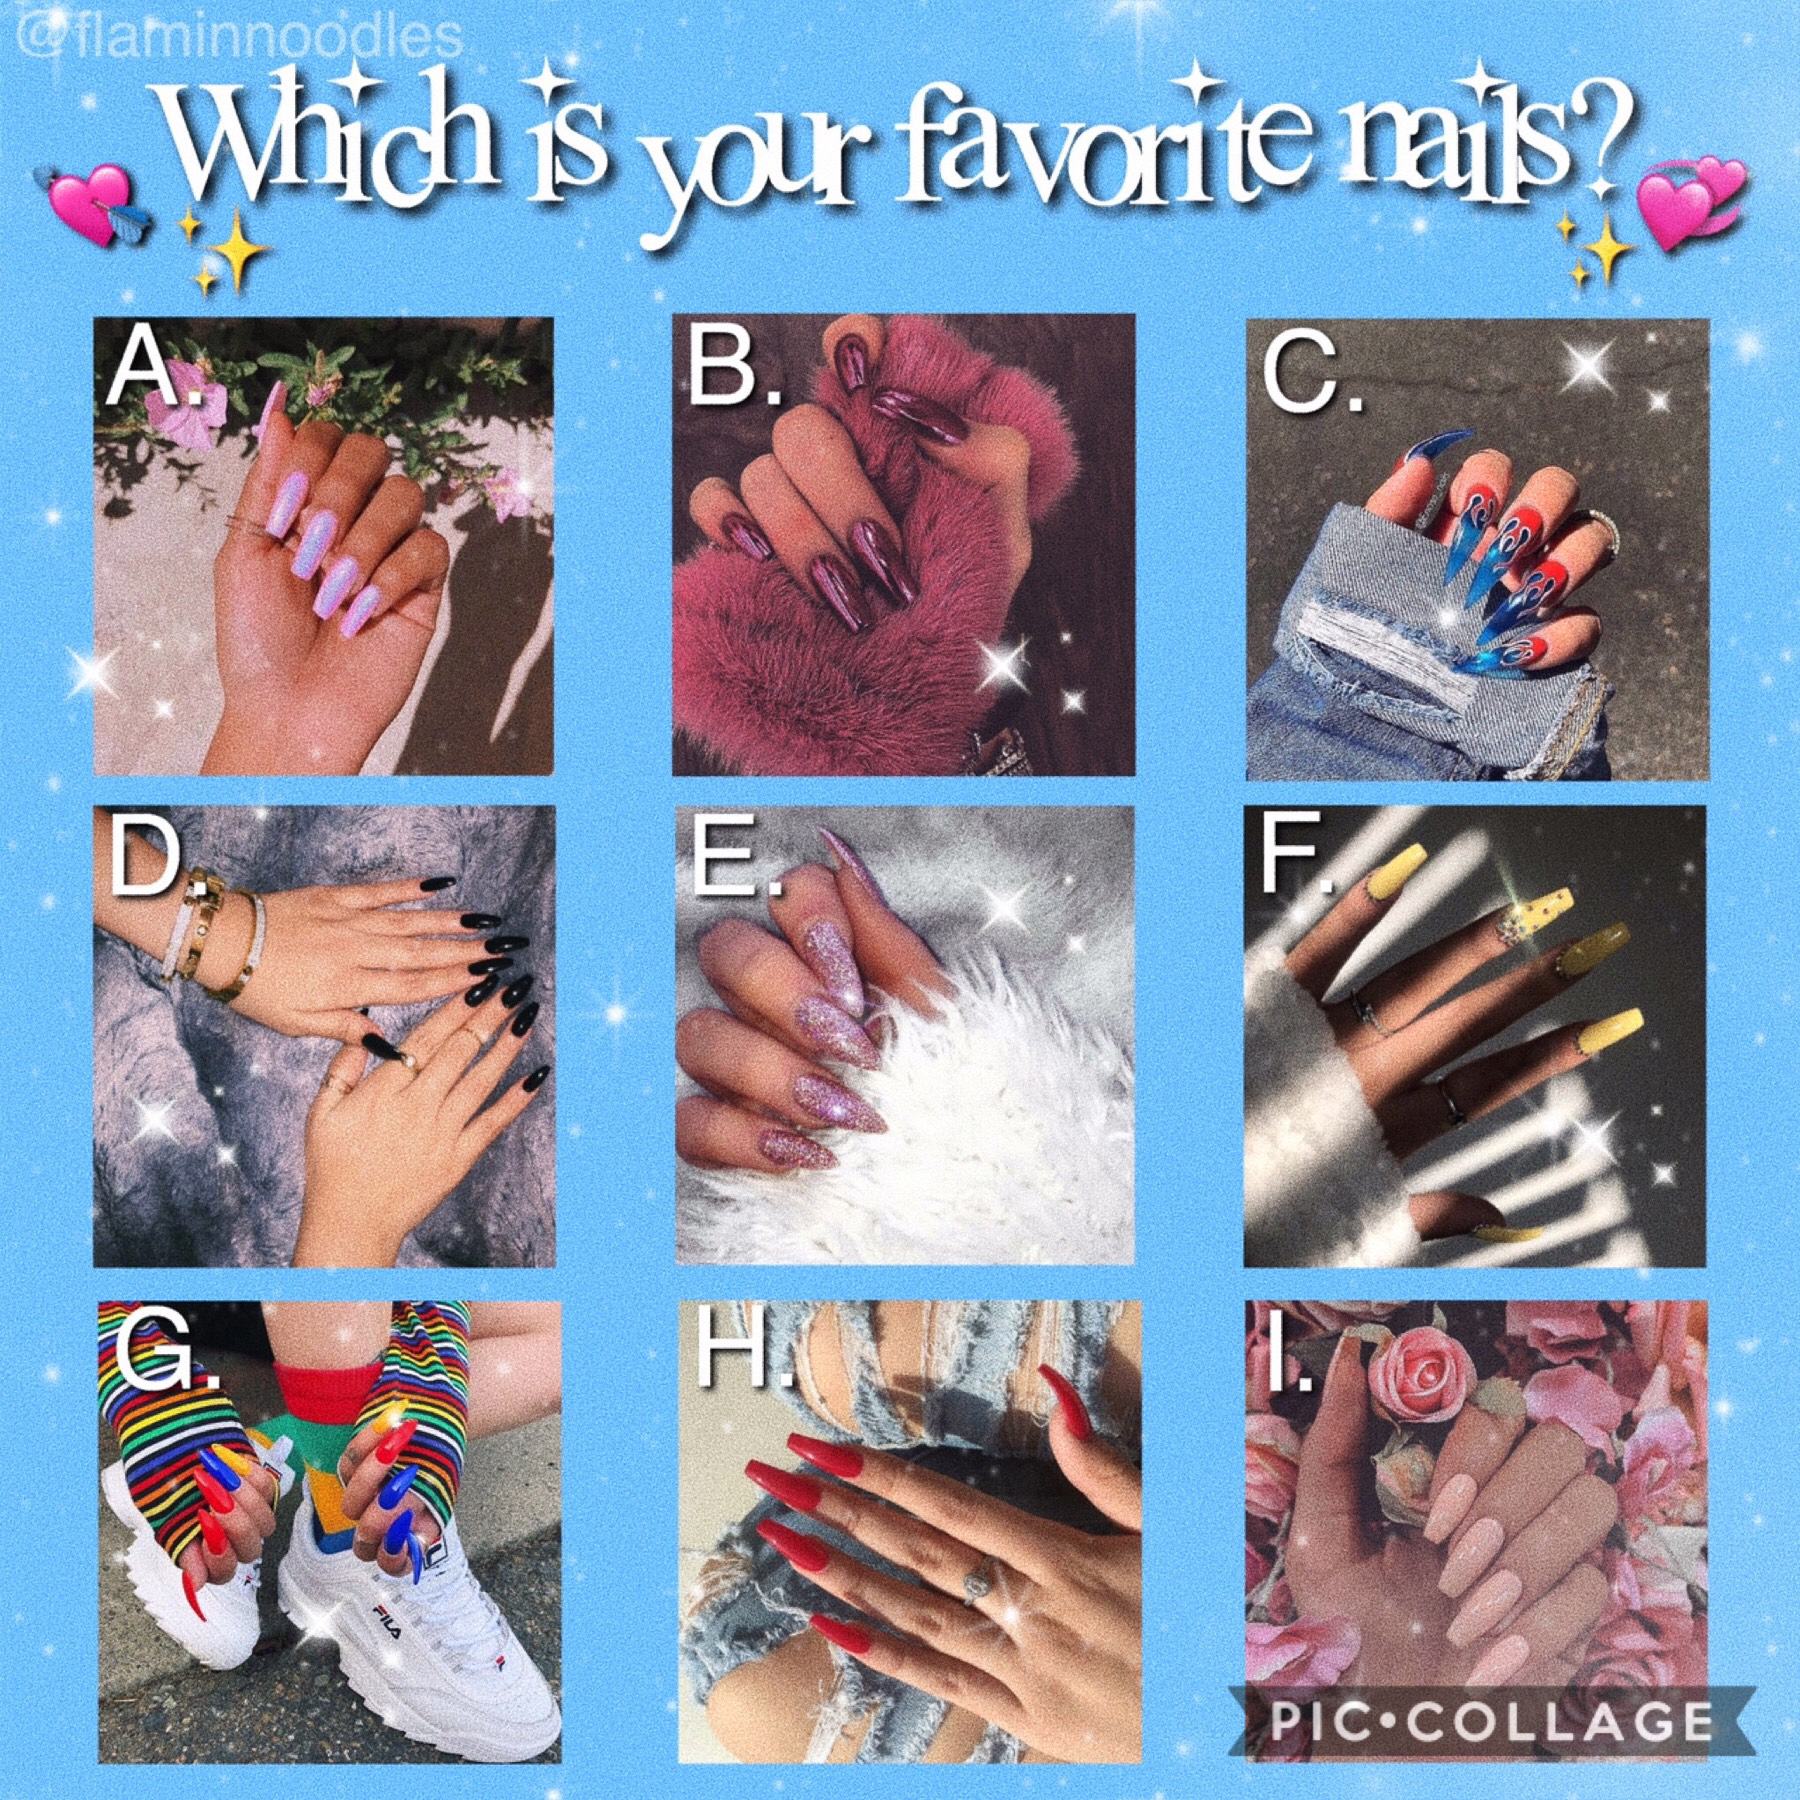 Tapppp 😘💅
Hey my wonderful followers!
Which Nails Are Your Favorite?
-Quick question should I post every Tuesday or Wednesday? 
Thx for your support 🥰